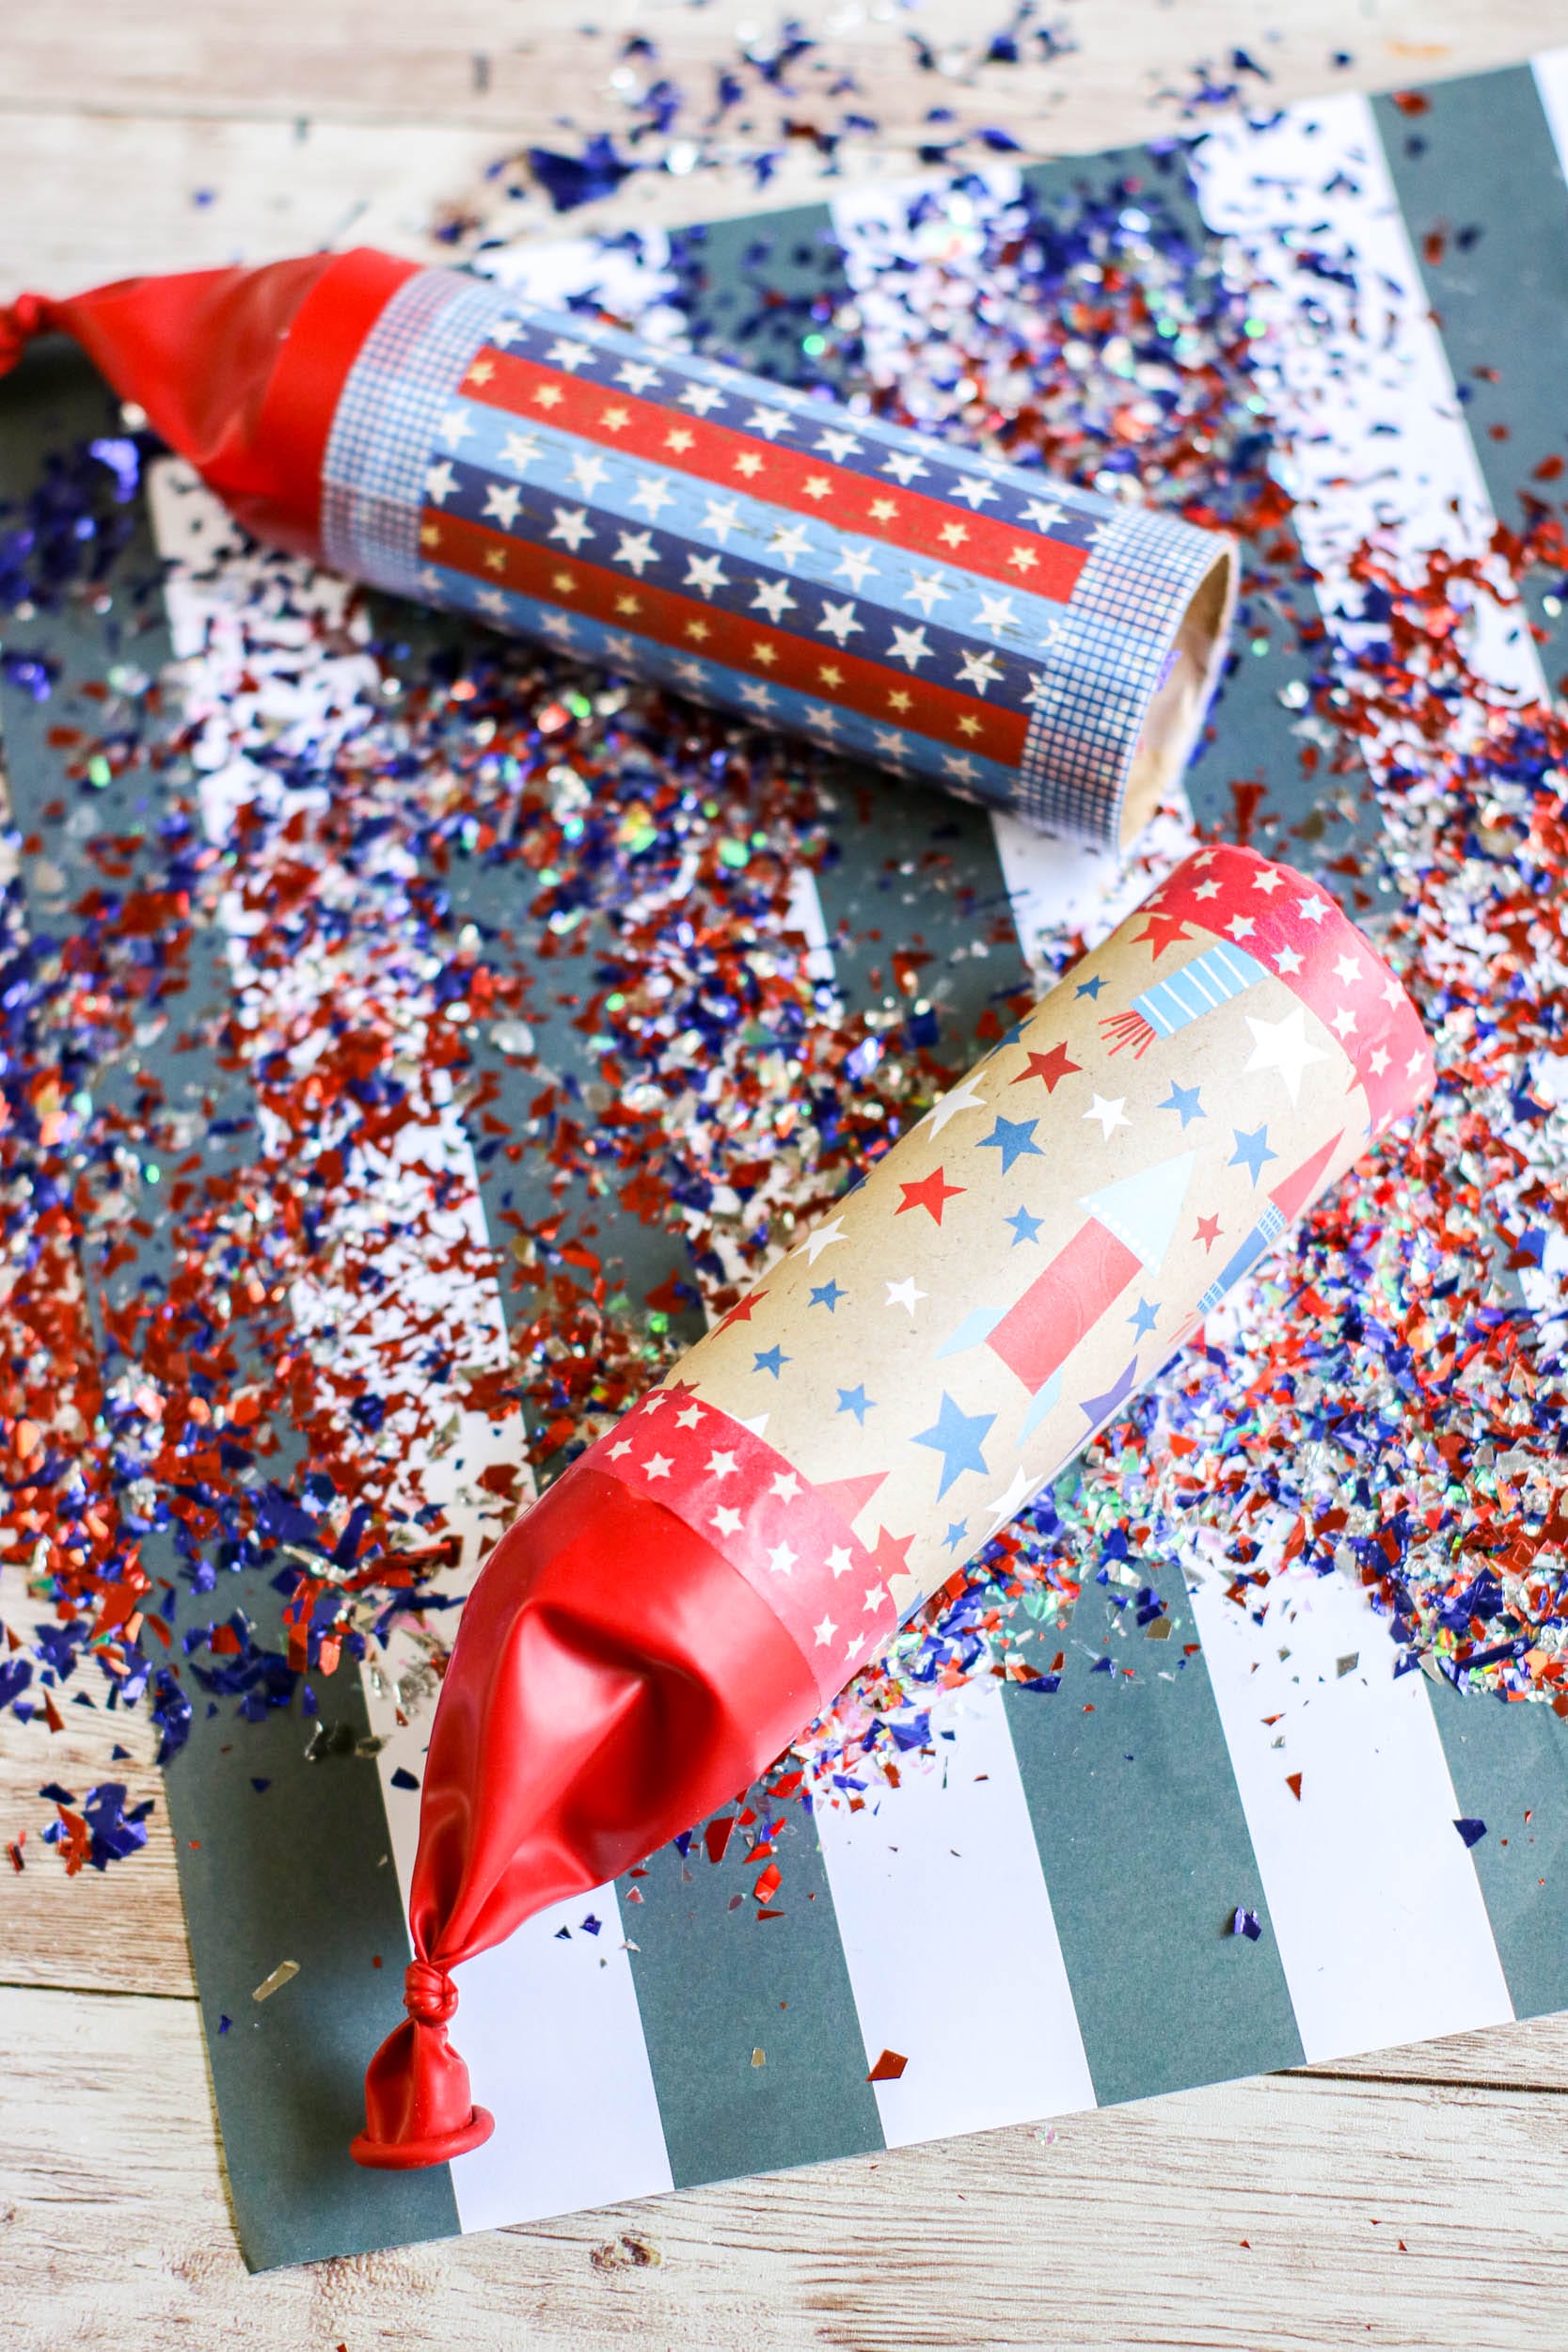 Make your own 4th of July Confetti Poppers.  Simple and fun for all ages, these DIY confetti poppers are inexpensive to make. With a few supplies, you can have fun making your own patriotic party favors for Independence Day.